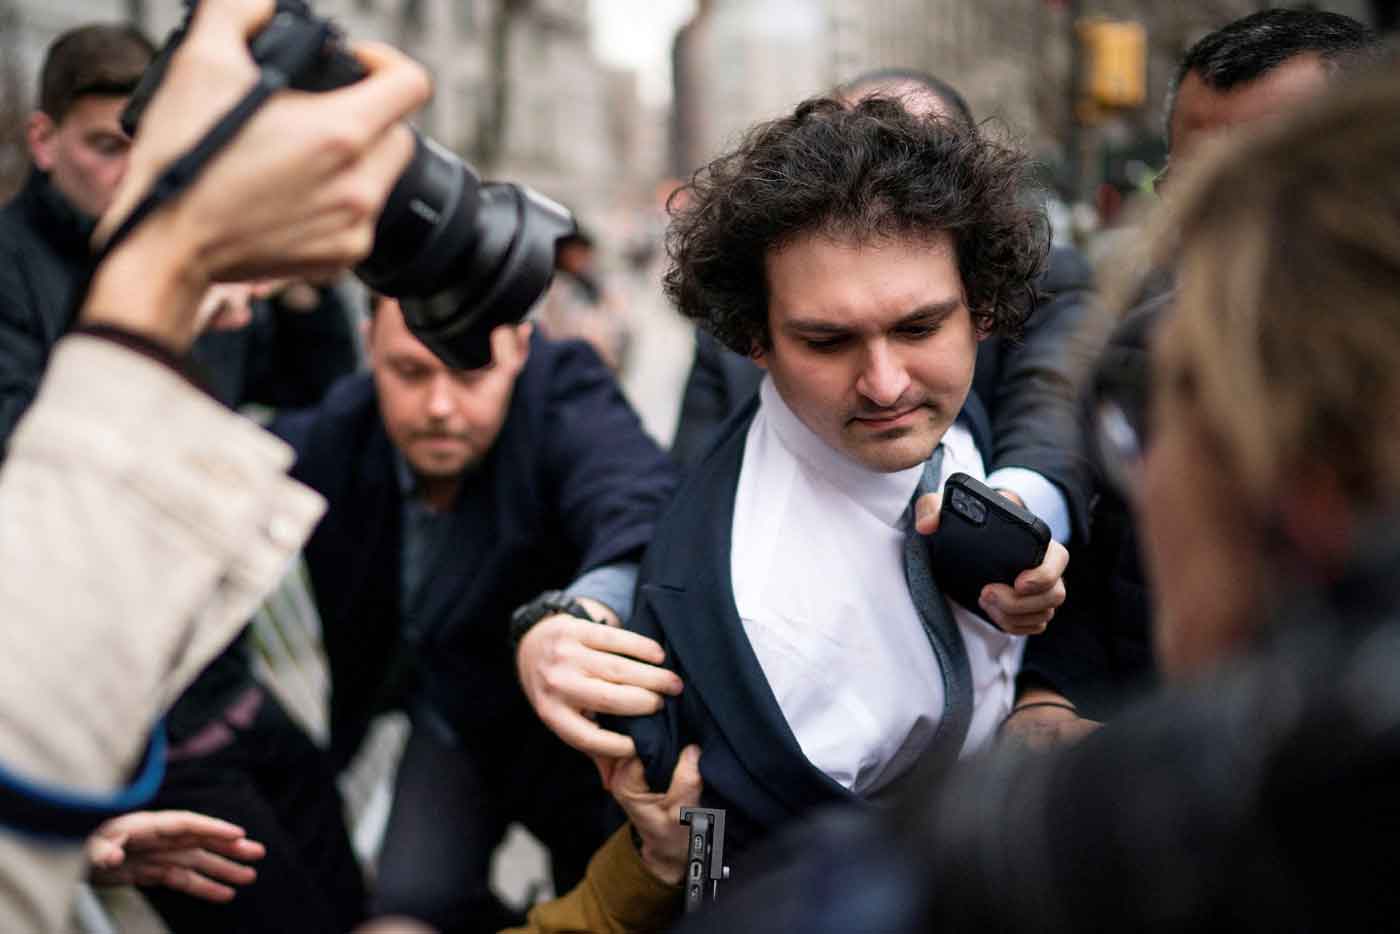 Curly headed man is jostled by a crowd of reporters with cameras and microphones